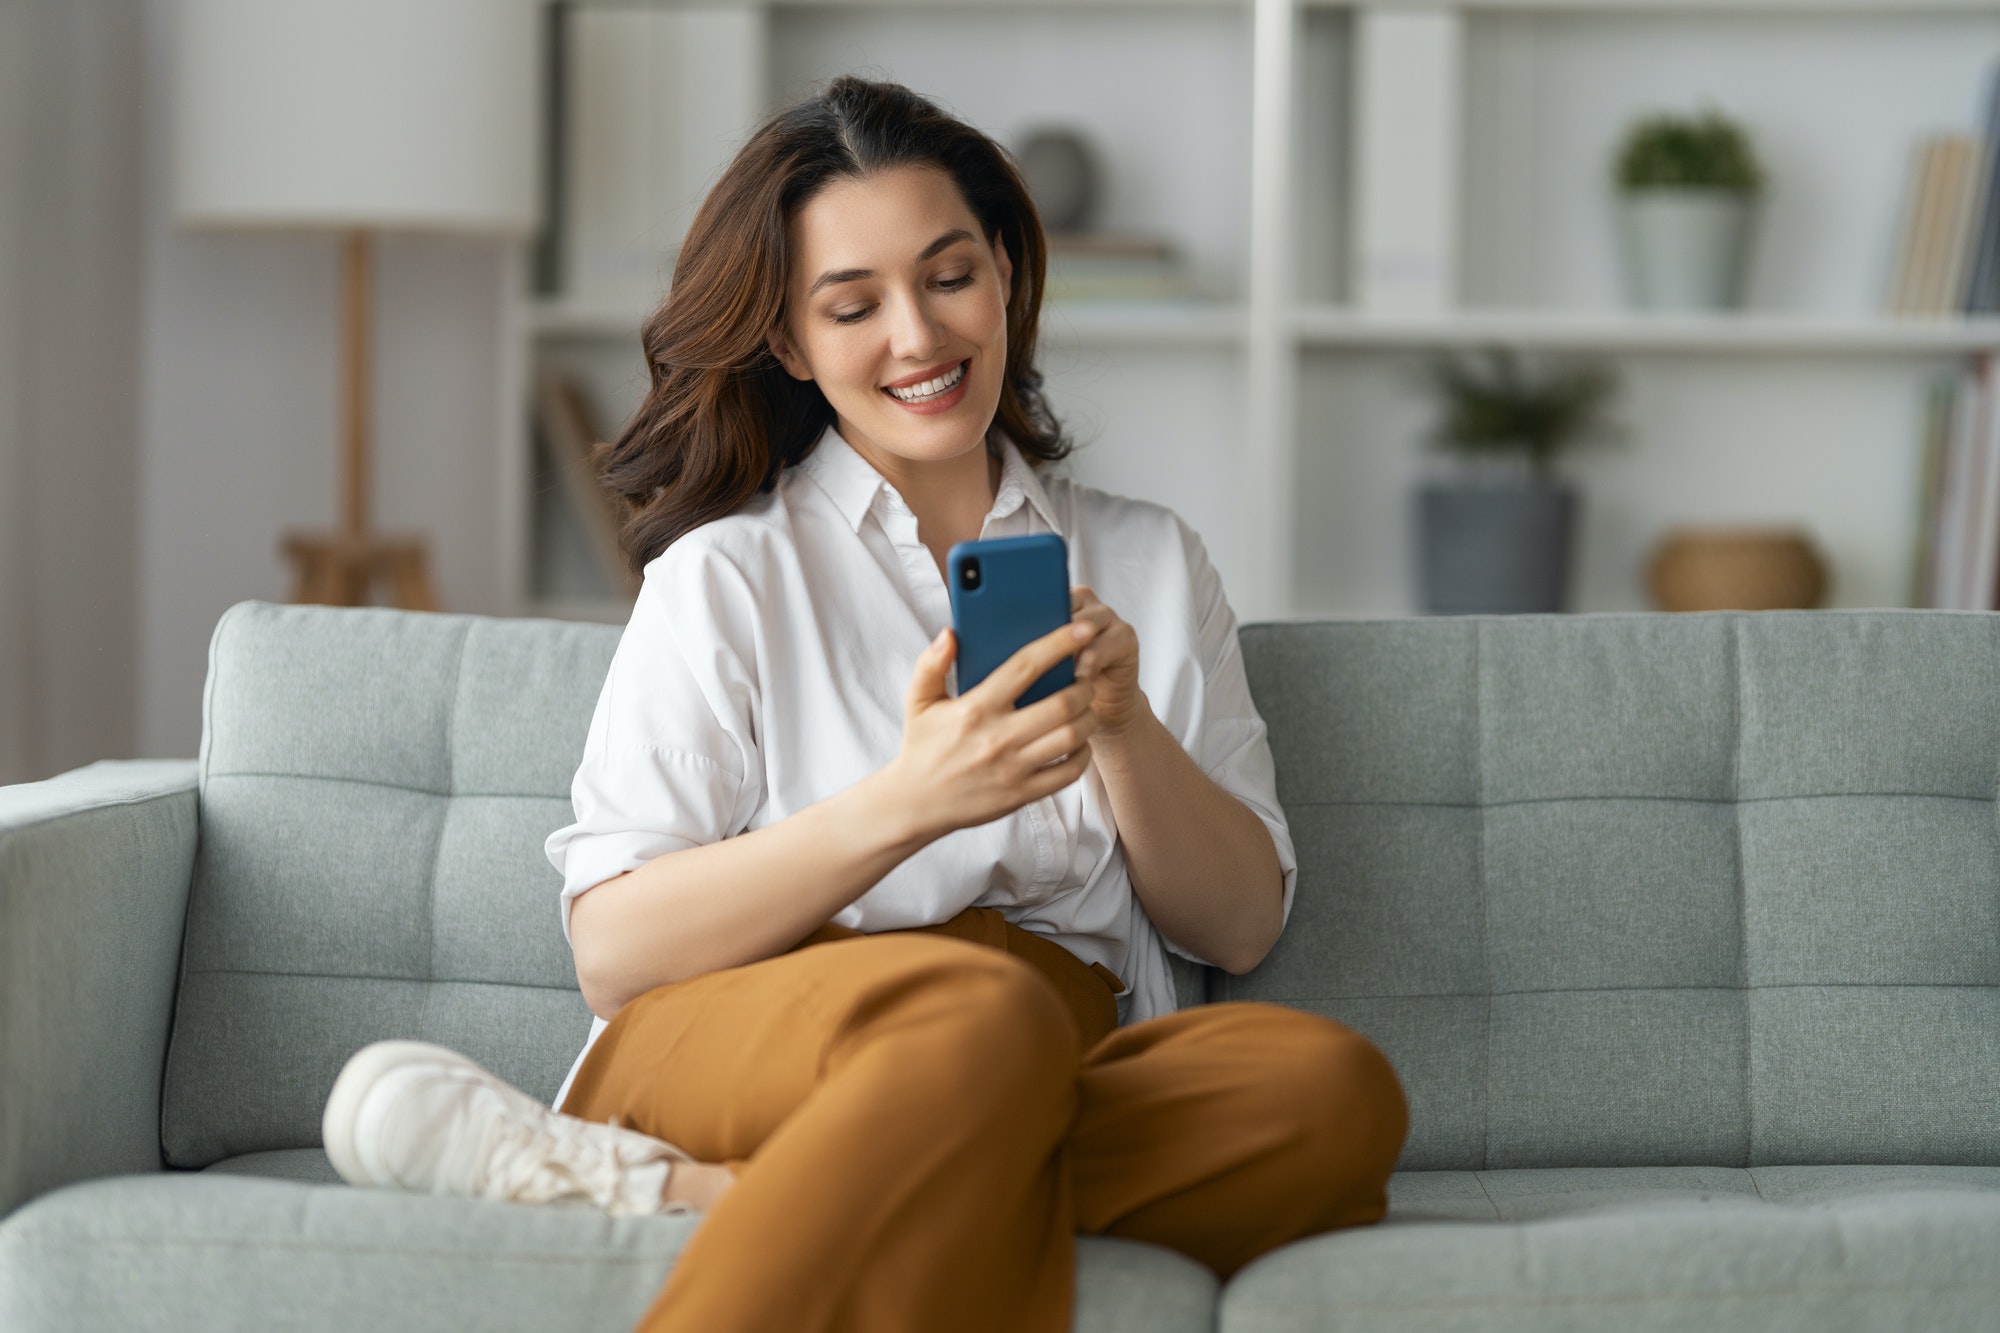 woman is using a phone sitting on a sofa